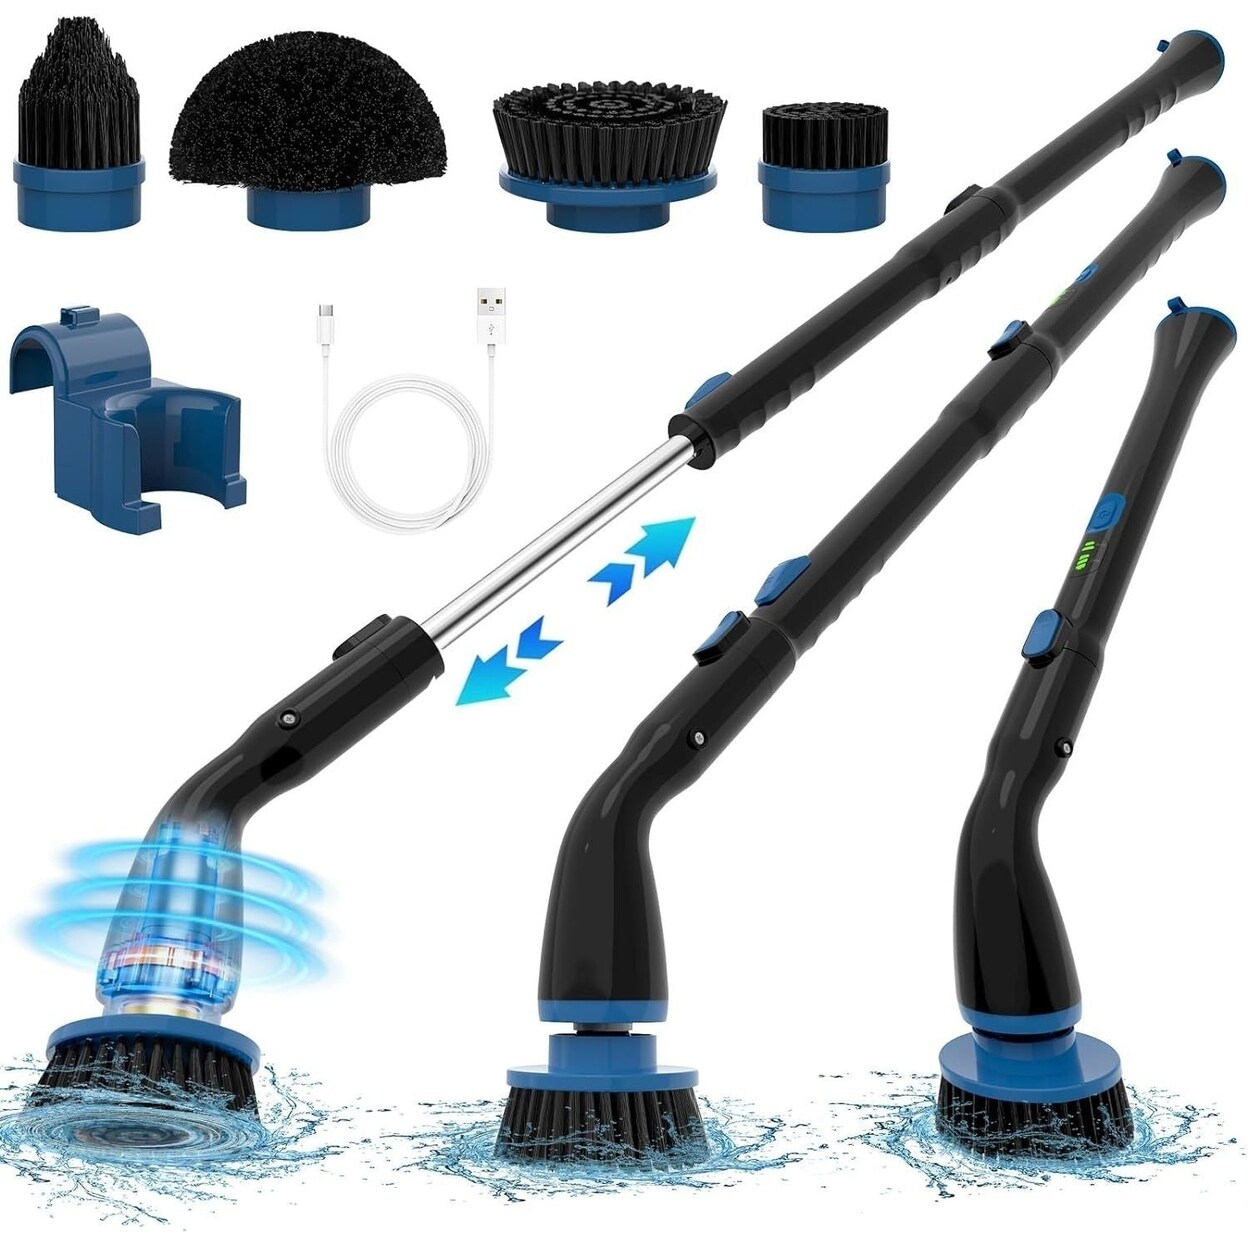 SKUSHOPS Electric Spin Scrubber Cordless Cleaning Brush with 4 Replaceable Brush Heads and Adjustable Extension Handle Power